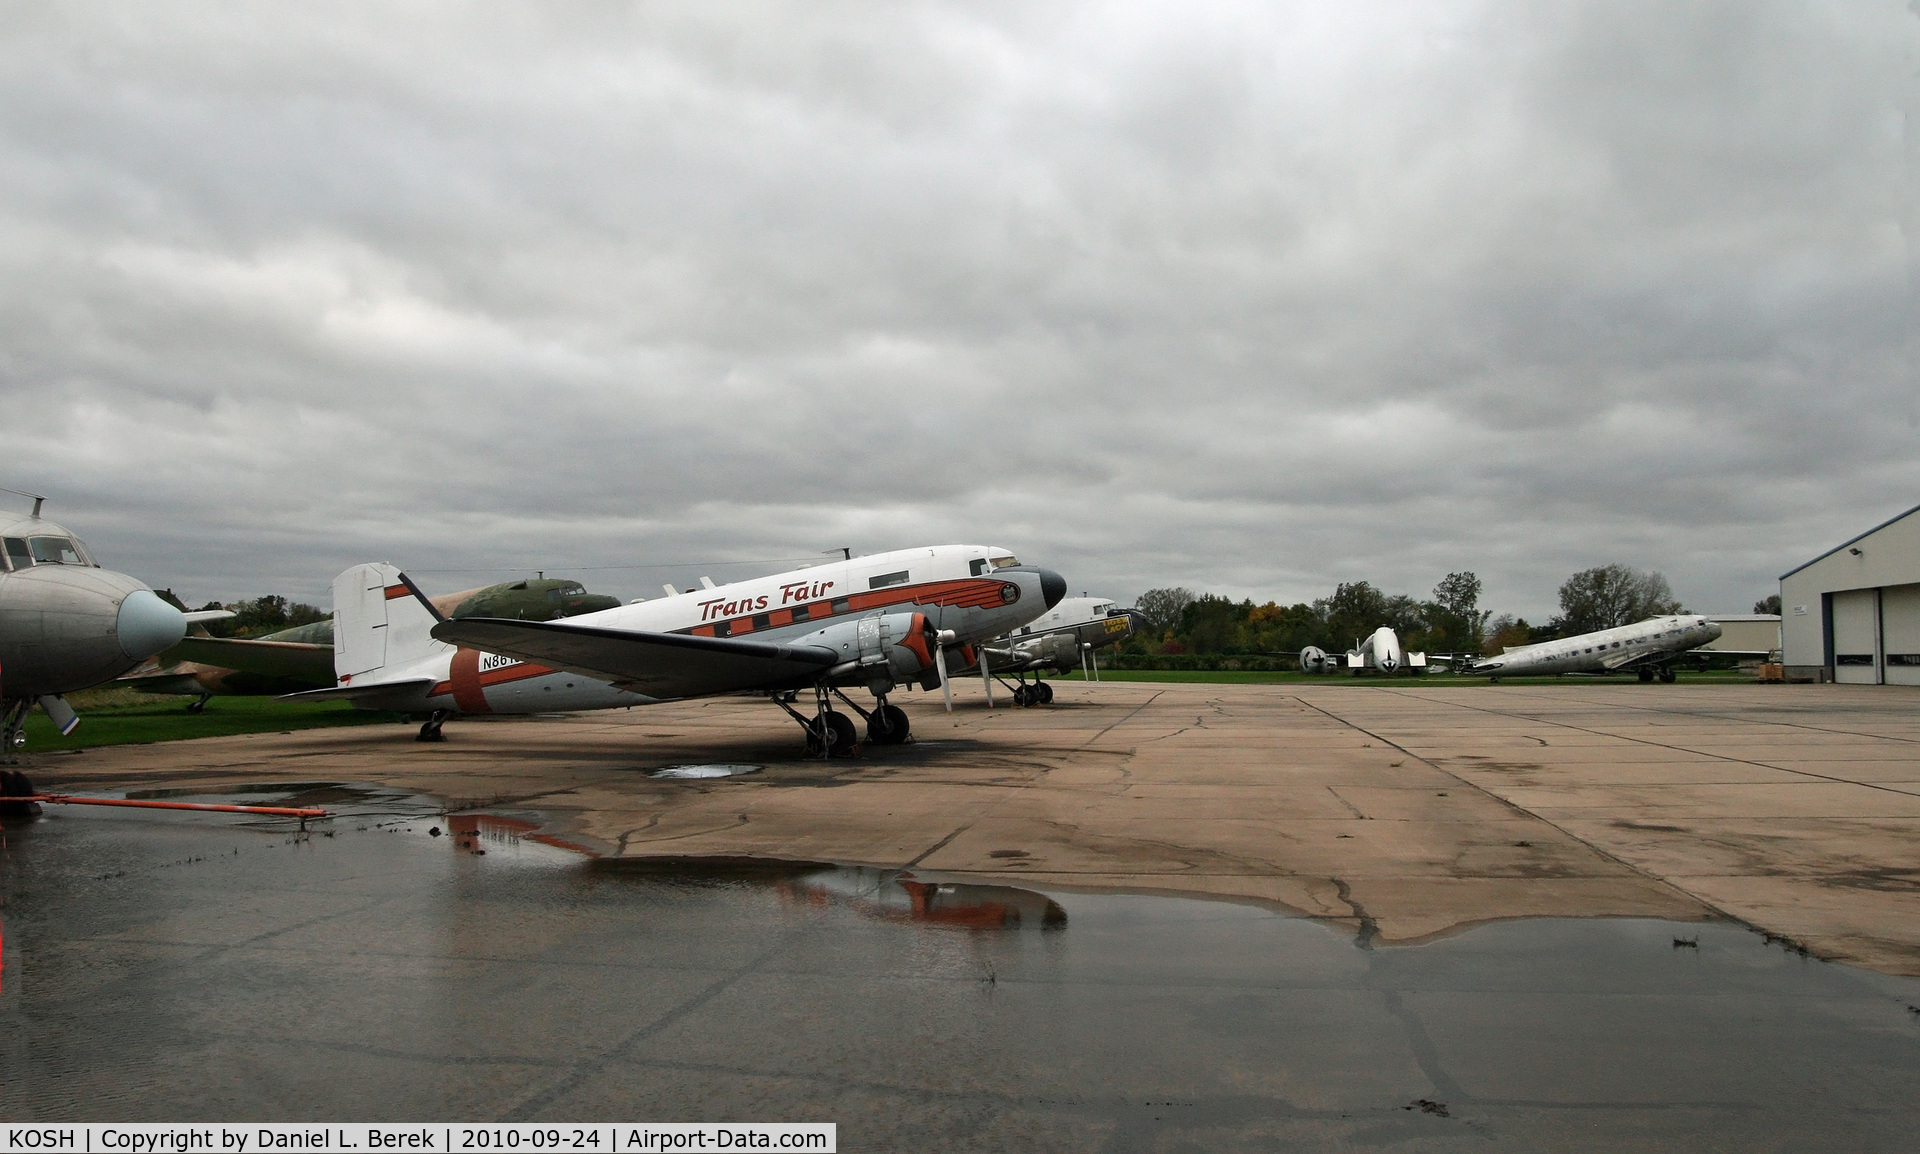 Wittman Regional Airport (OSH) - In addition to the Experimental Aircraft Association, Basler Turbo Conversions is a major tenant at the airport.